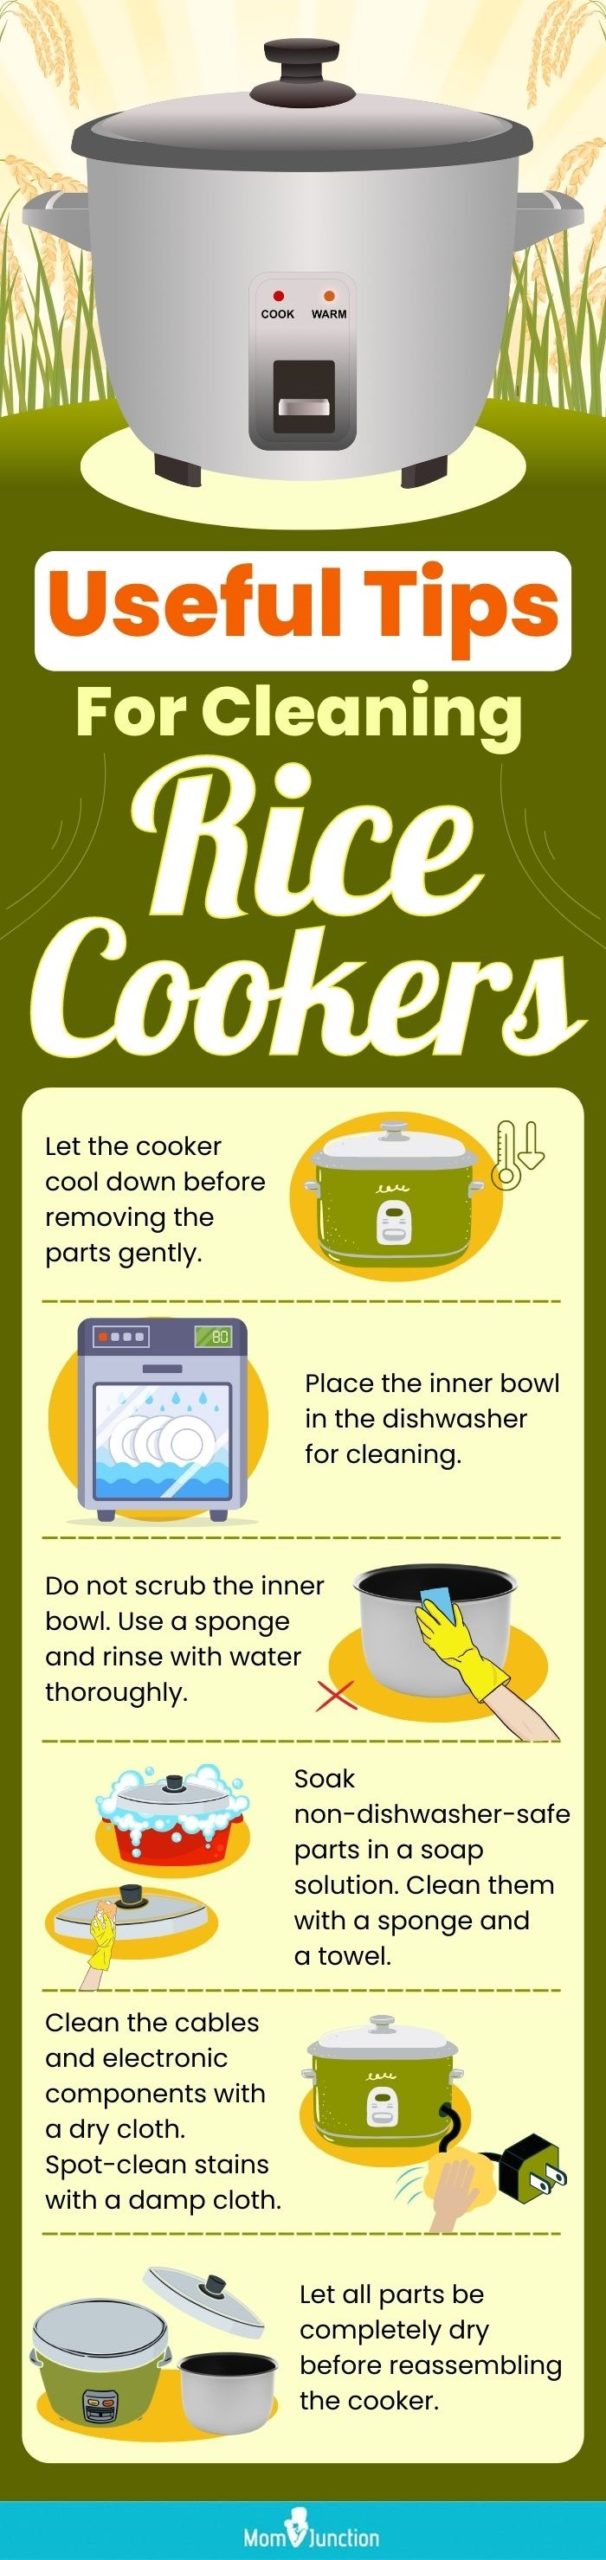 https://www.momjunction.com/wp-content/uploads/2020/10/Useful-Tips-For-Cleaning-Rice-Cookers-scaled.jpg